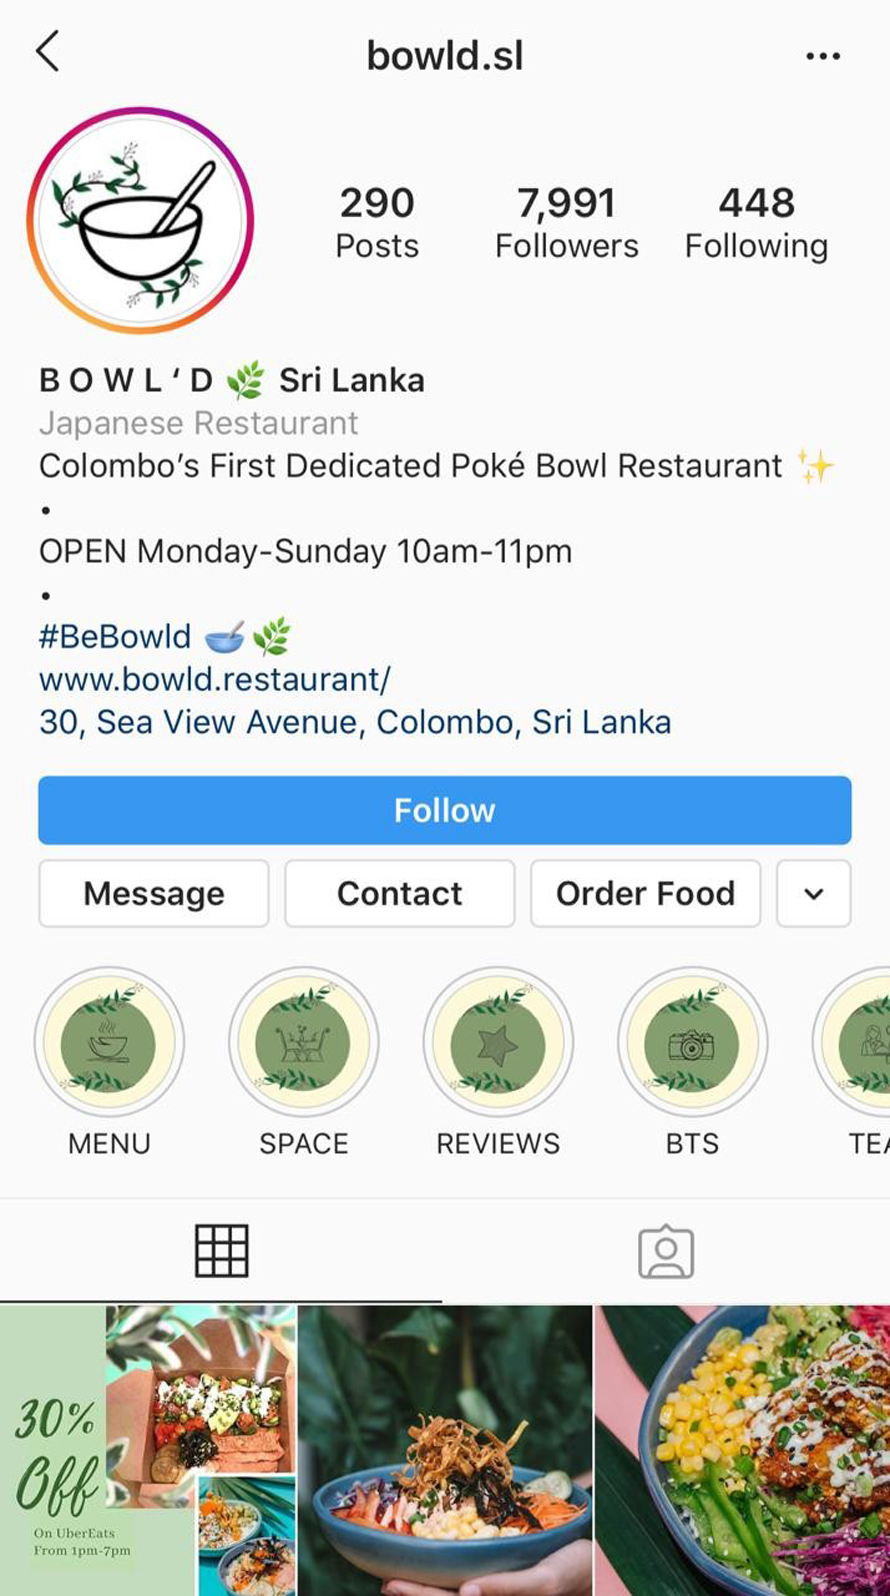 Restaurants Can Now Add New Food Order Features on Instagram image 1